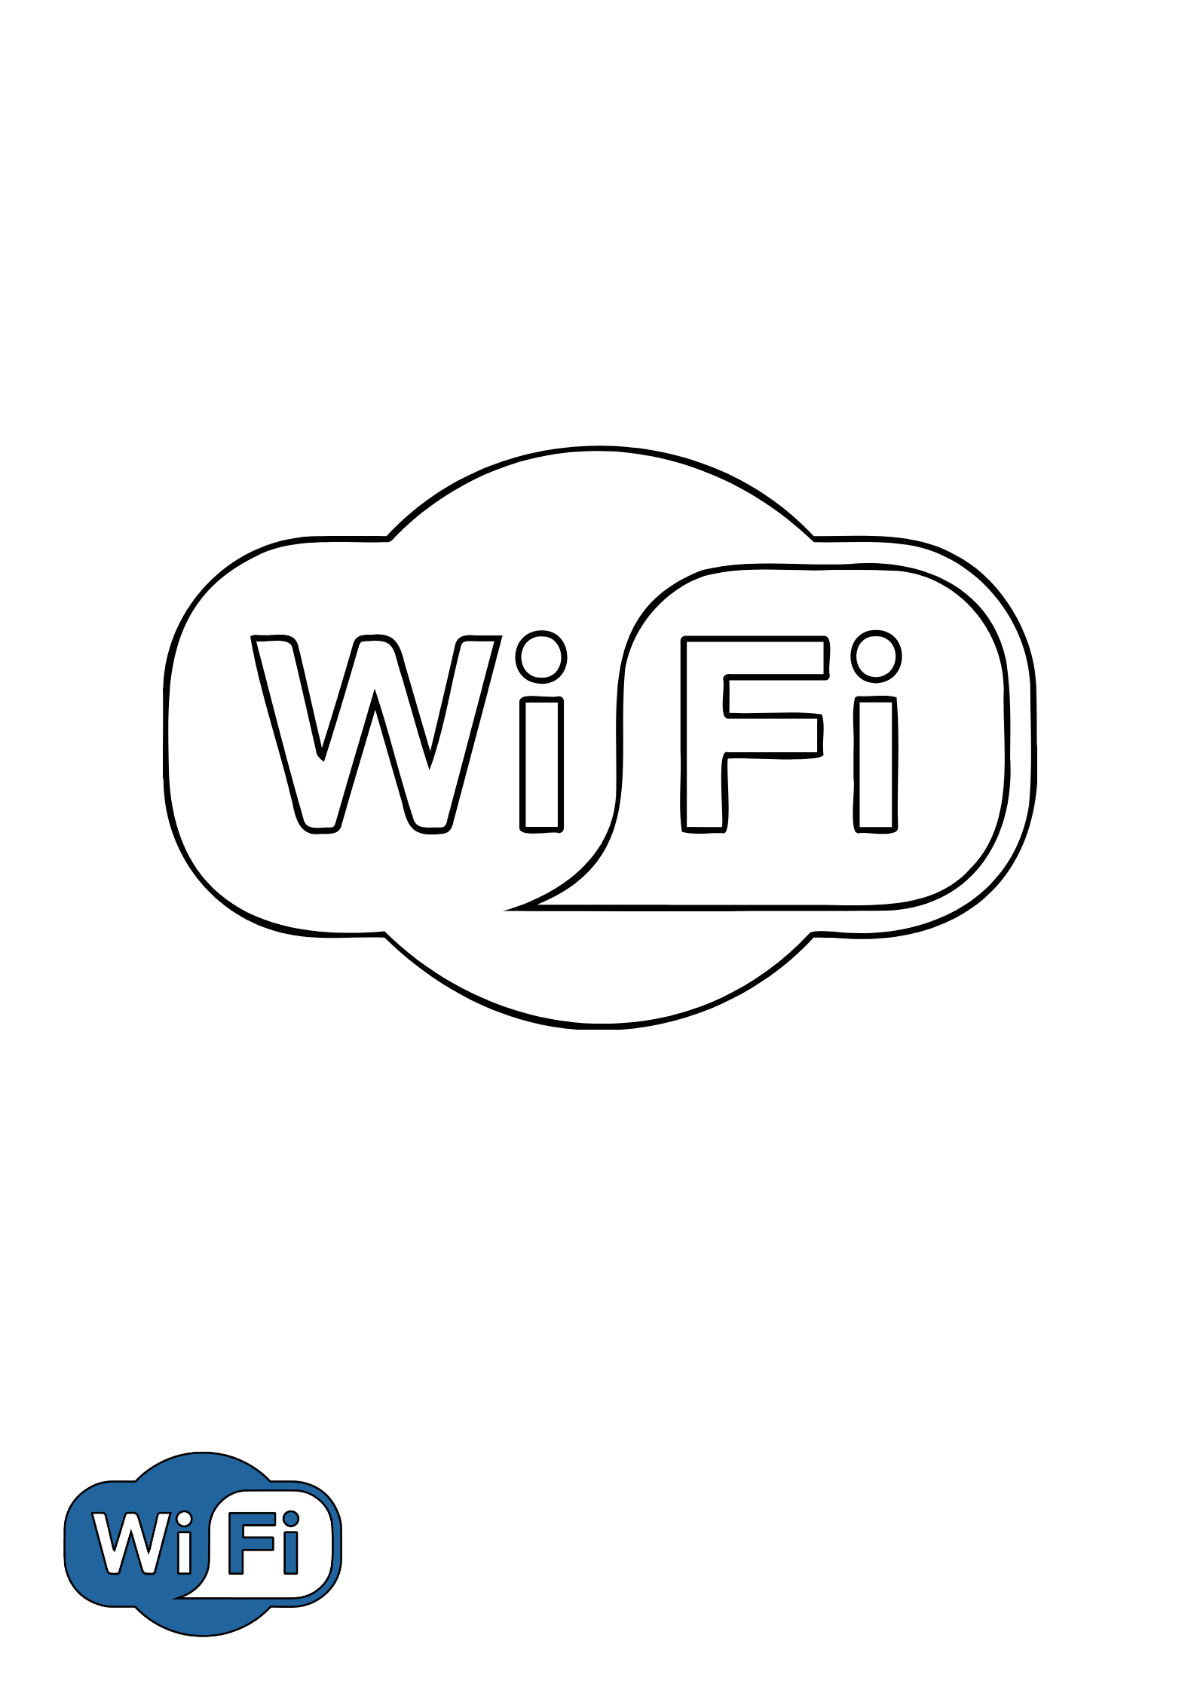 WiFi Logo Coloring Page